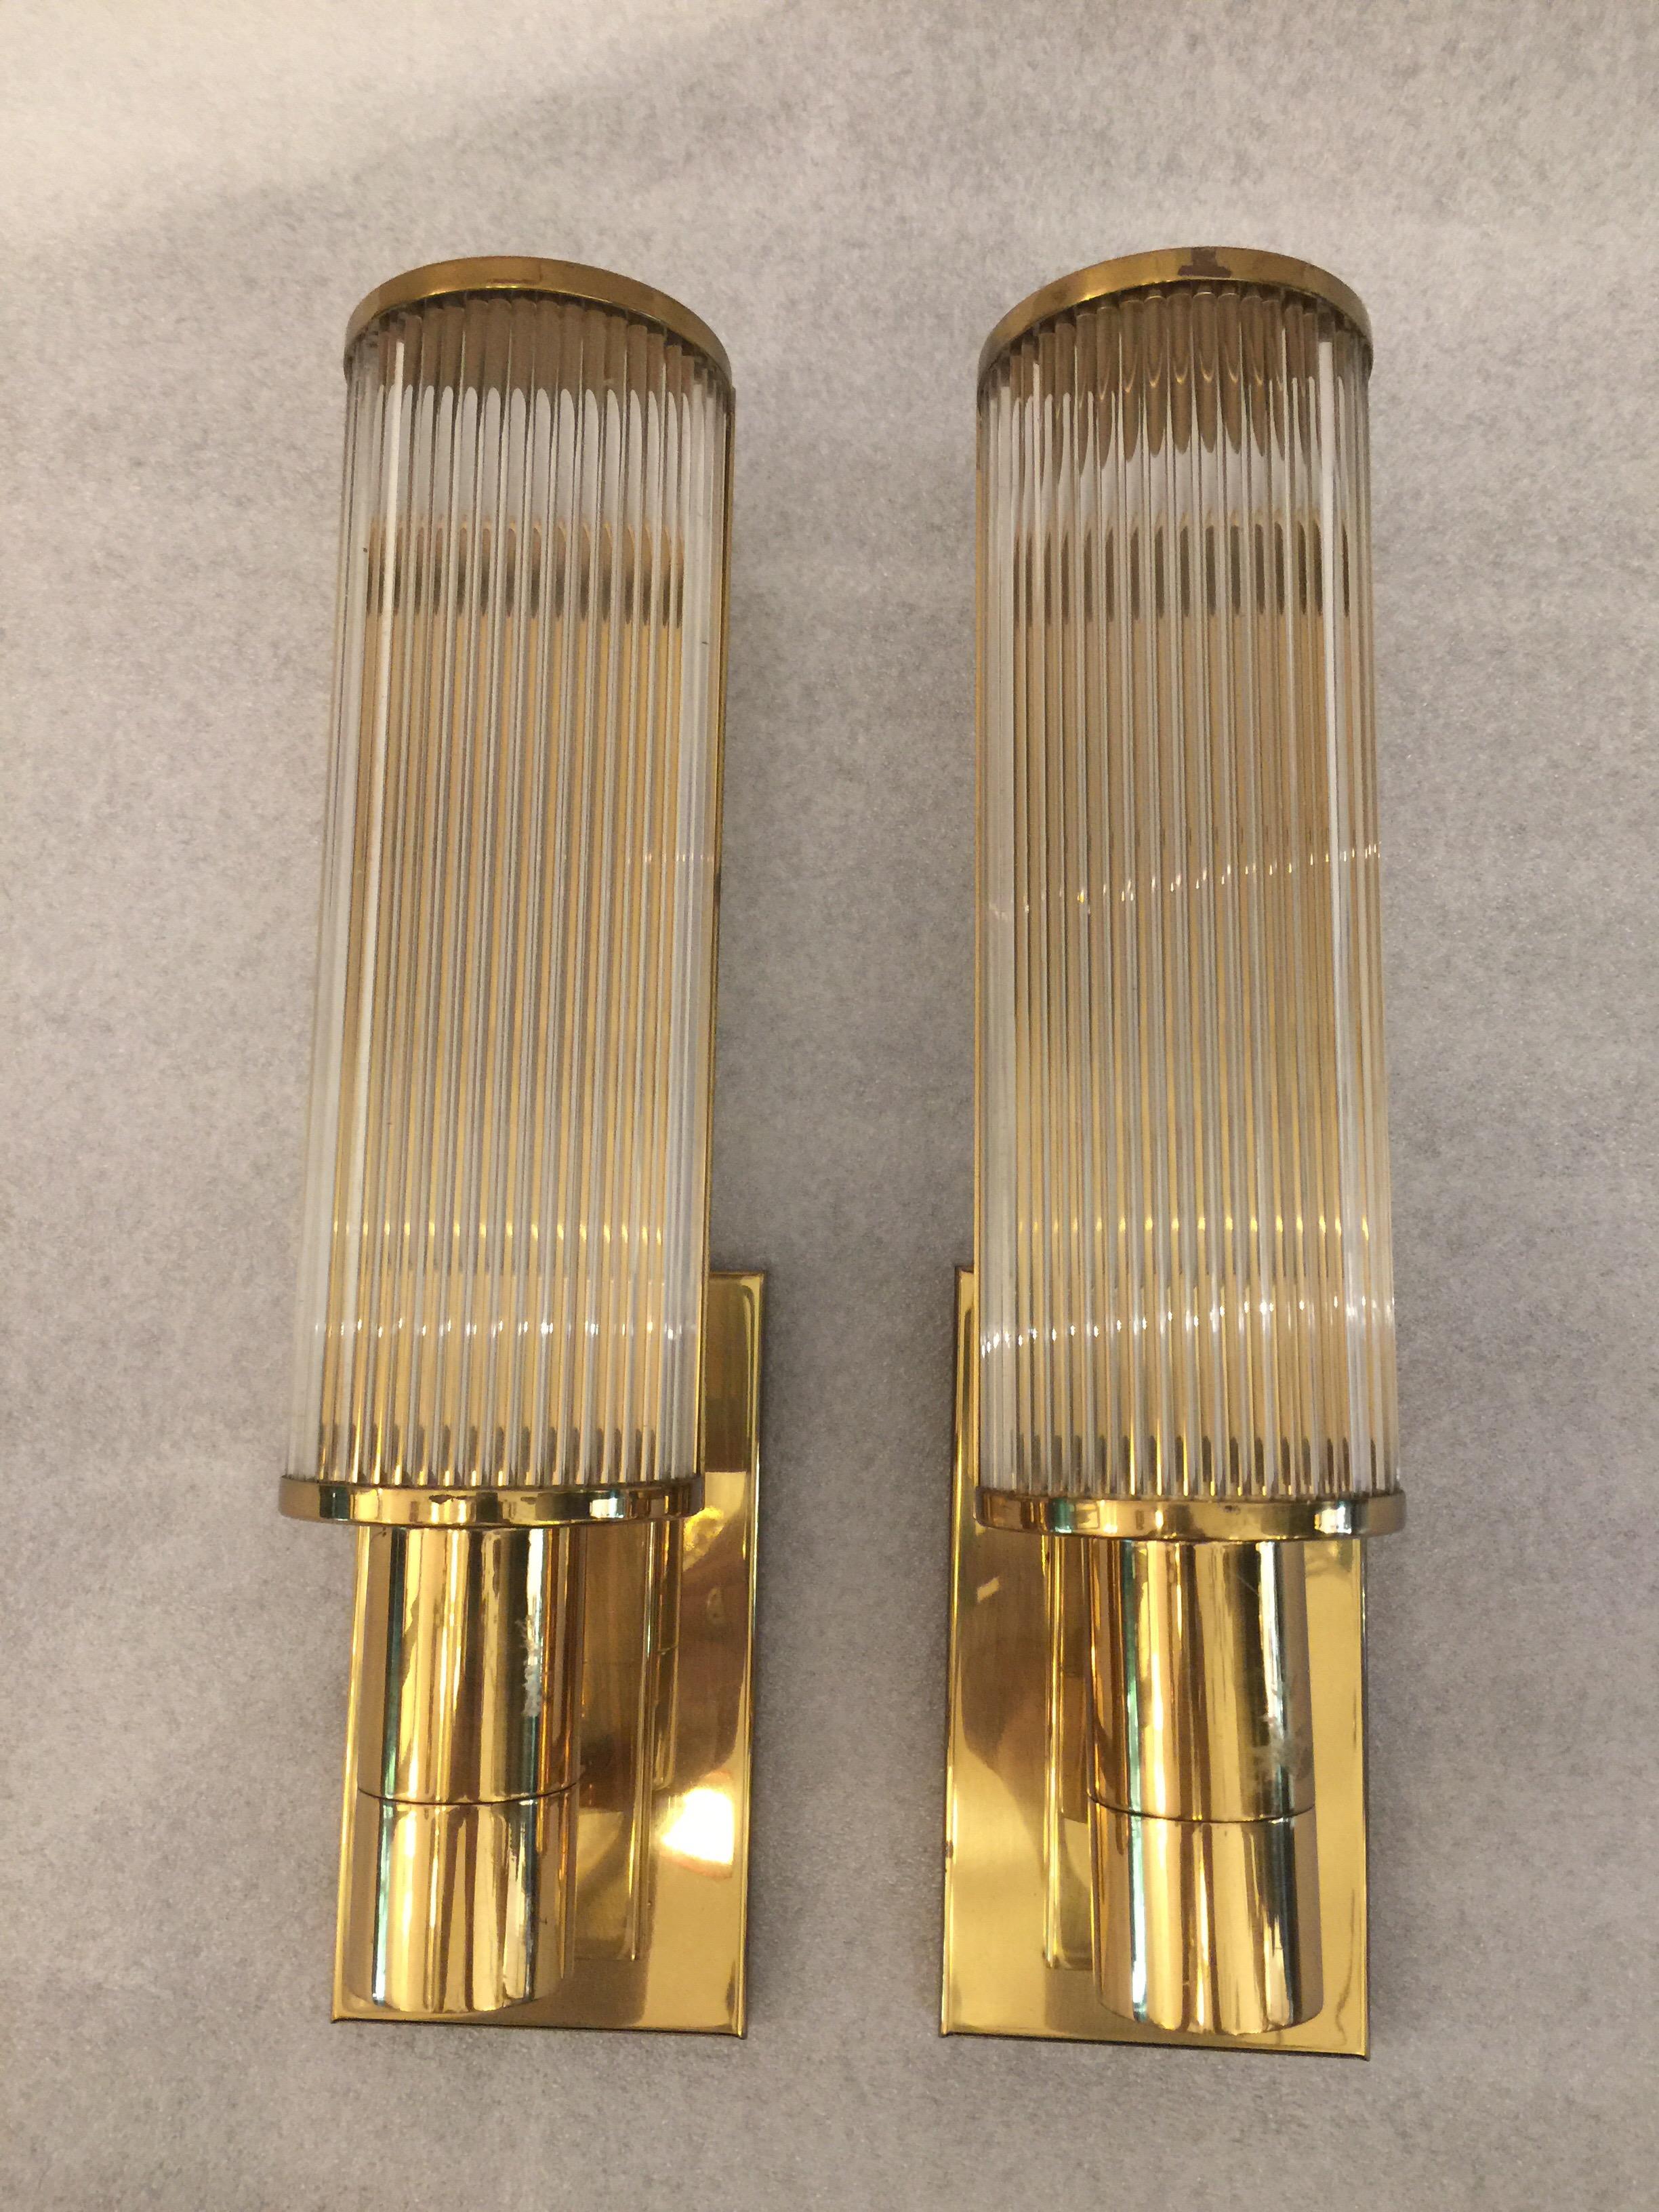 Pair of Casella Brass and Glass Rod Wall Sconces 4